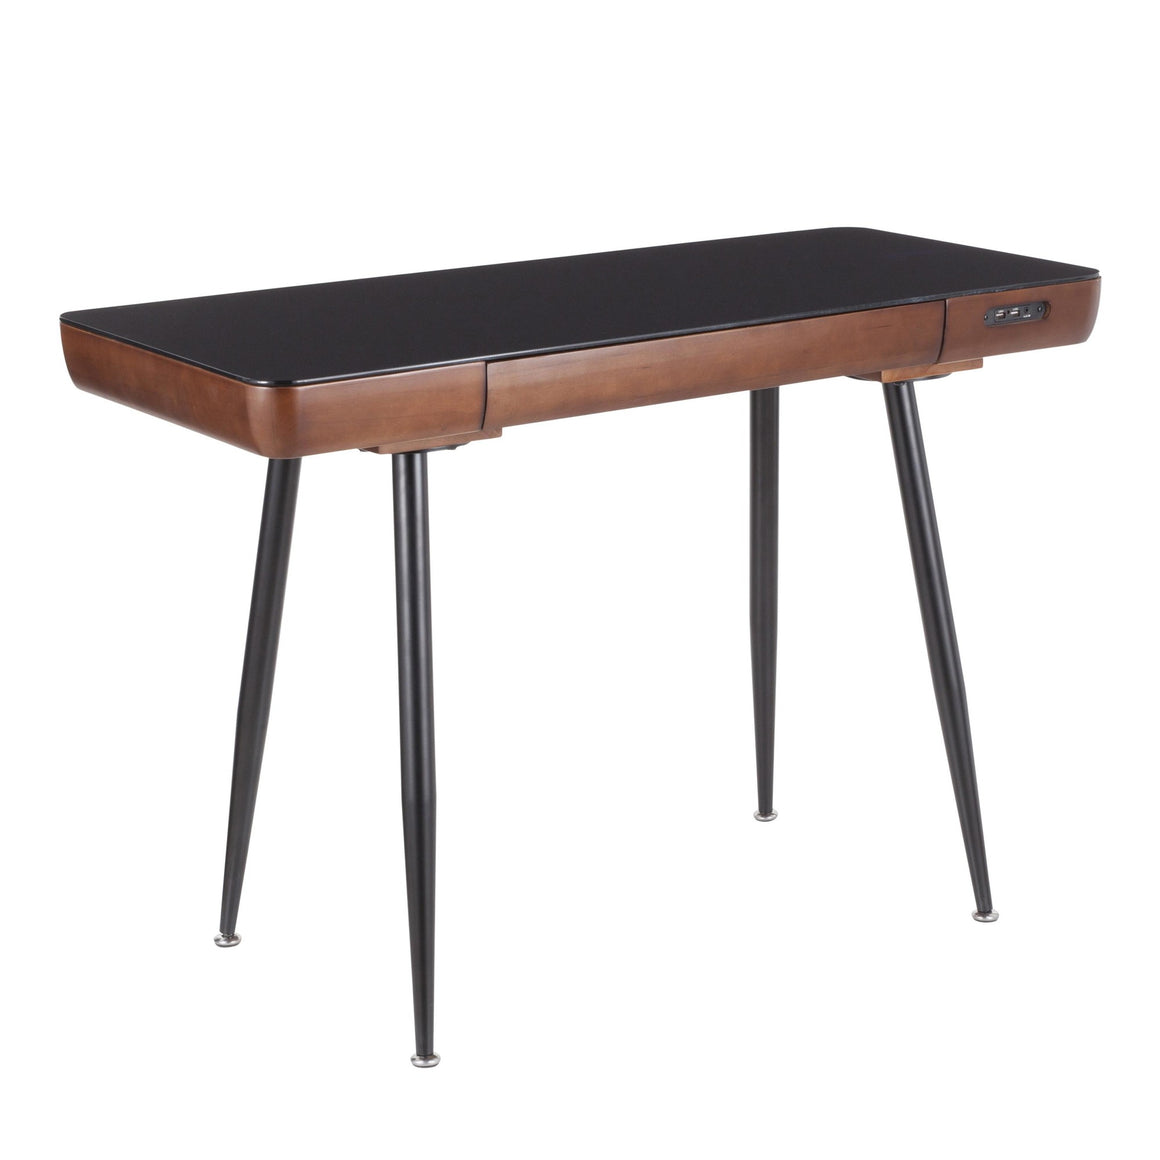 Boom Mid-Century Modern Desk in Black Metal with a Walnut Wood Top and Black Tempered Glass by LumiSource